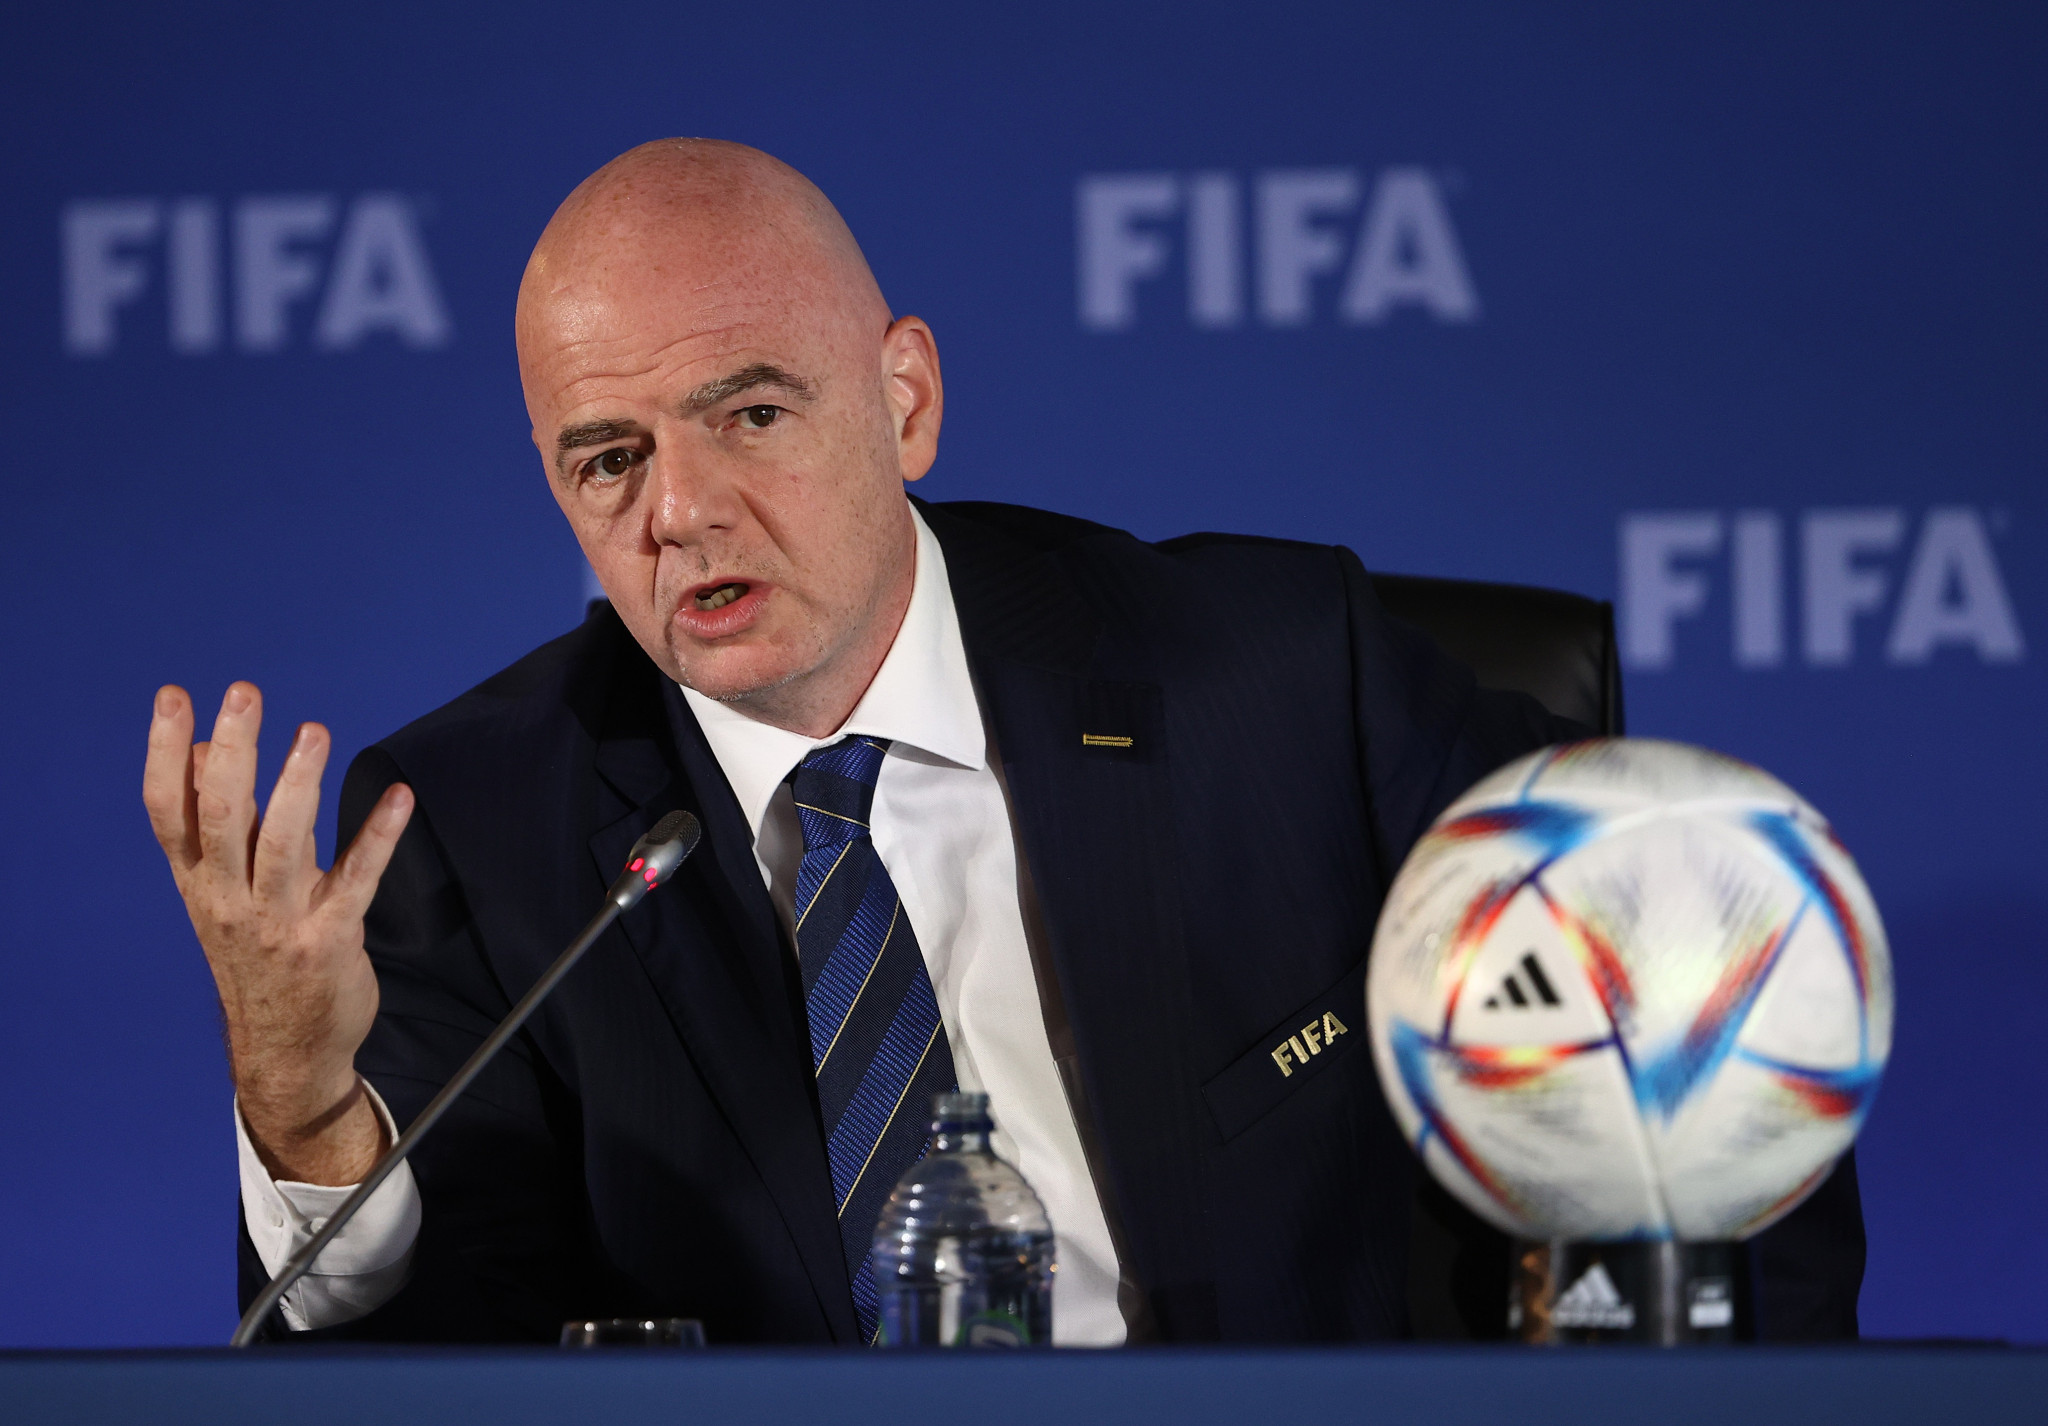 FIFA urges teams to "focus on football" at World Cup amid criticism of Qatar